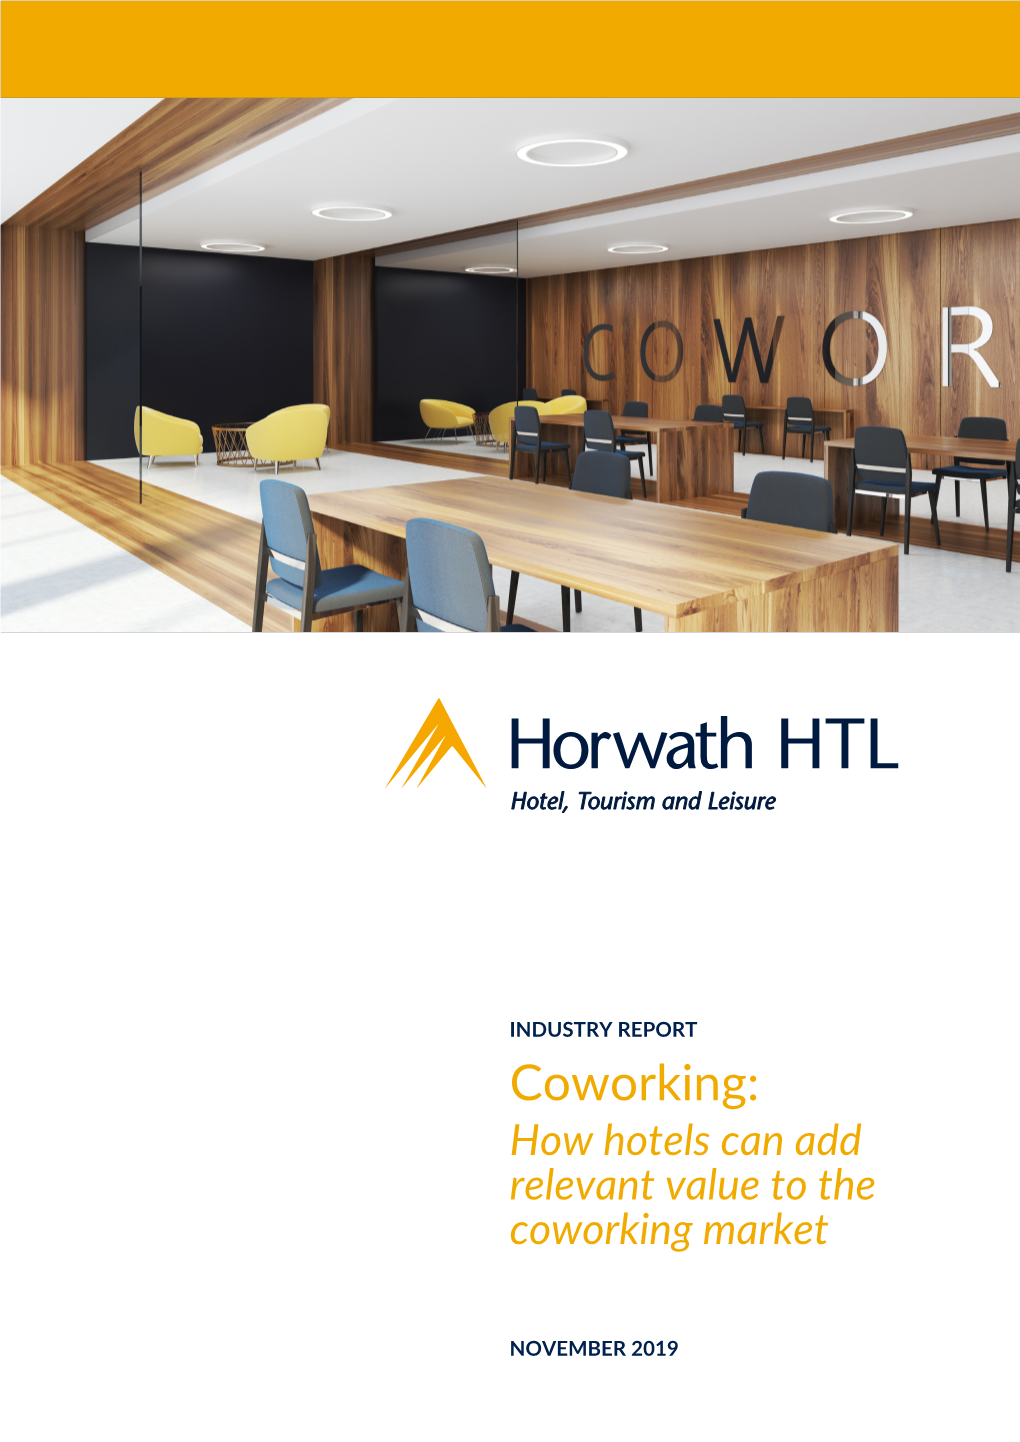 How Hotels Can Add Relevant Value to the Coworking Market